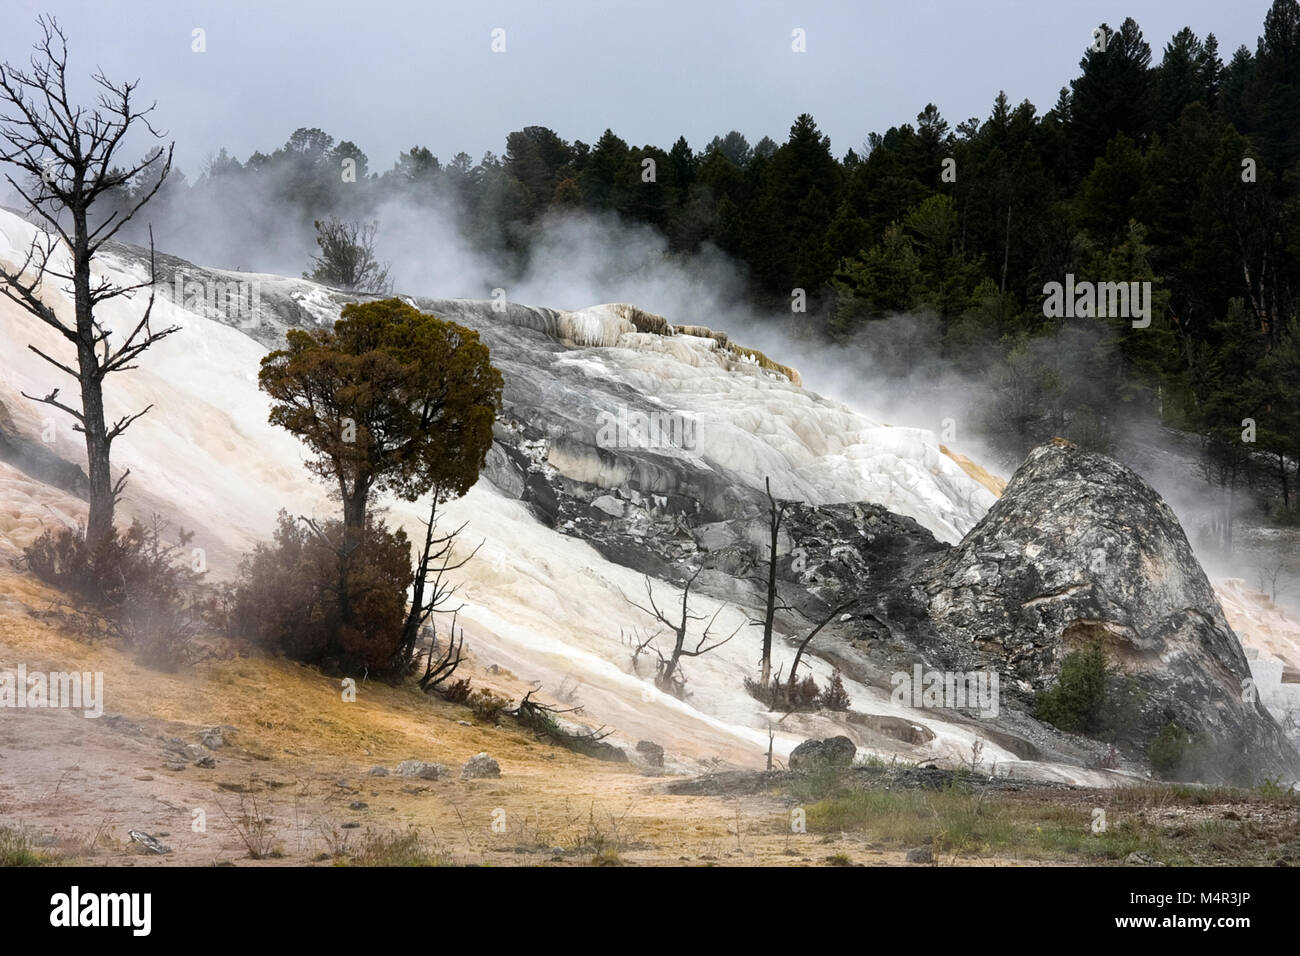 Palette Spring, Mammoth Hot Springs, Yellowstone National Park, USA Stock Photo